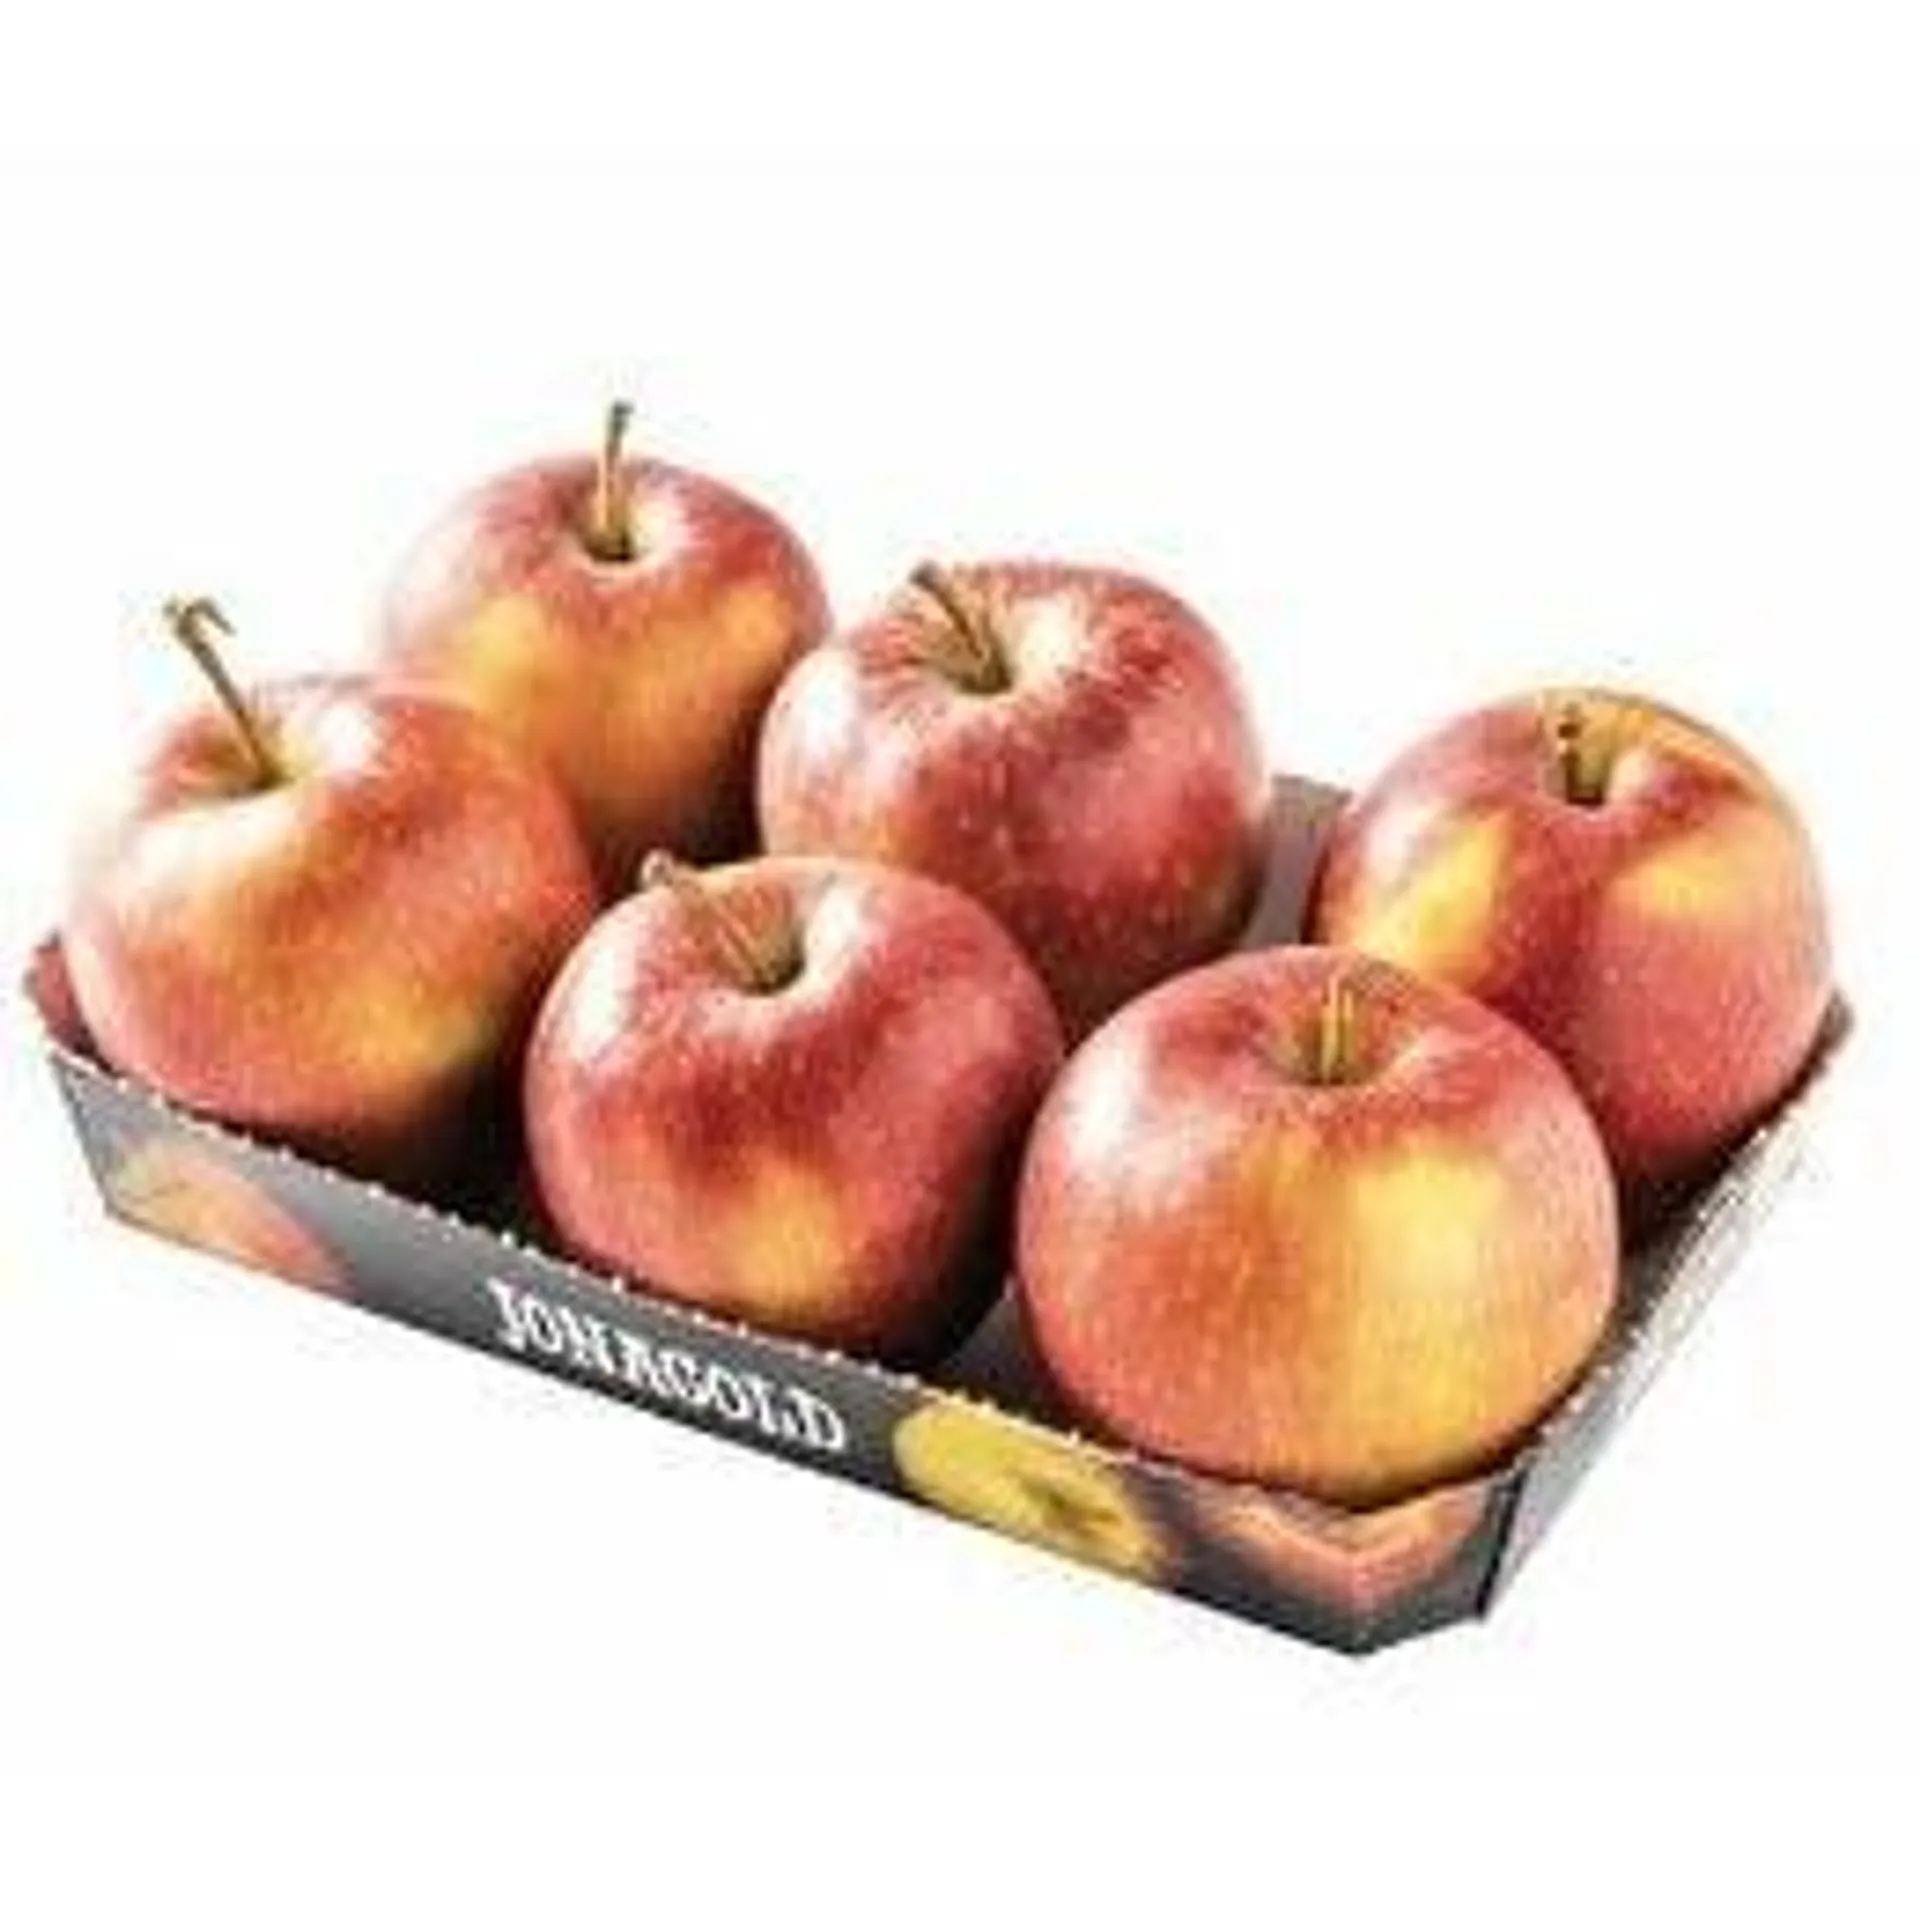 Pomme Jonagold local 500g